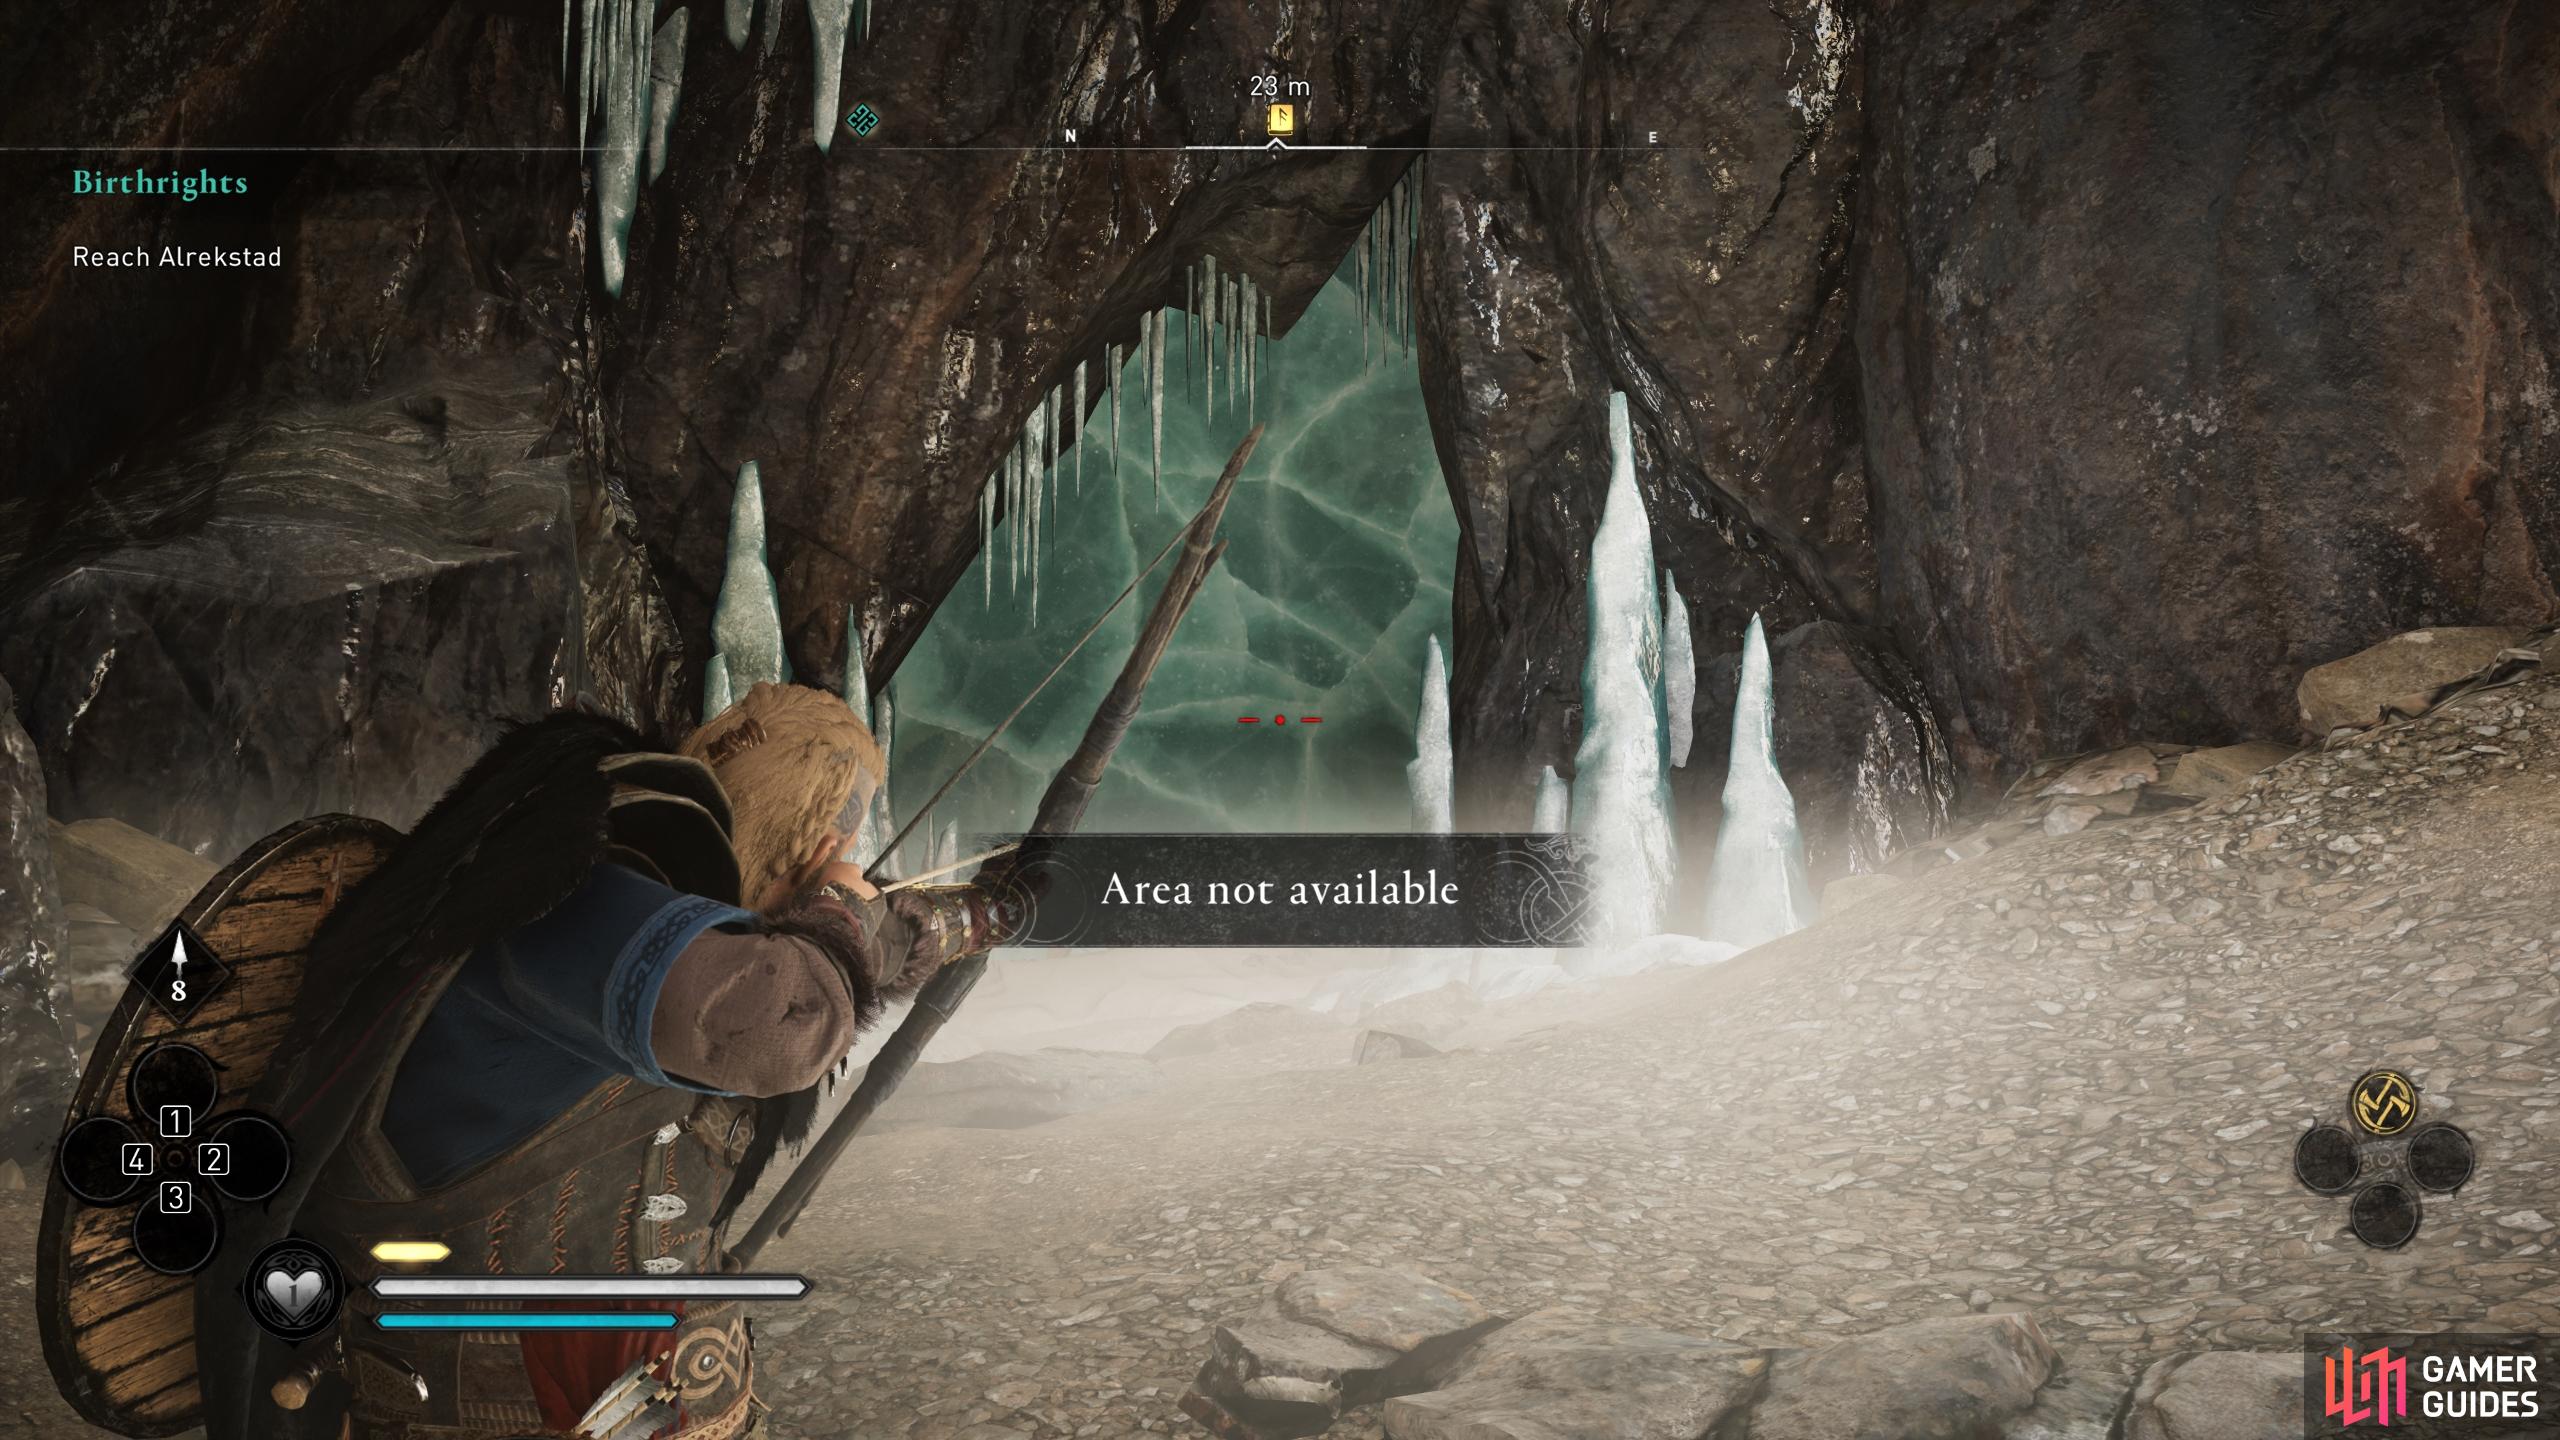 You'll need to break the ice barrier to gain access to the cave. 